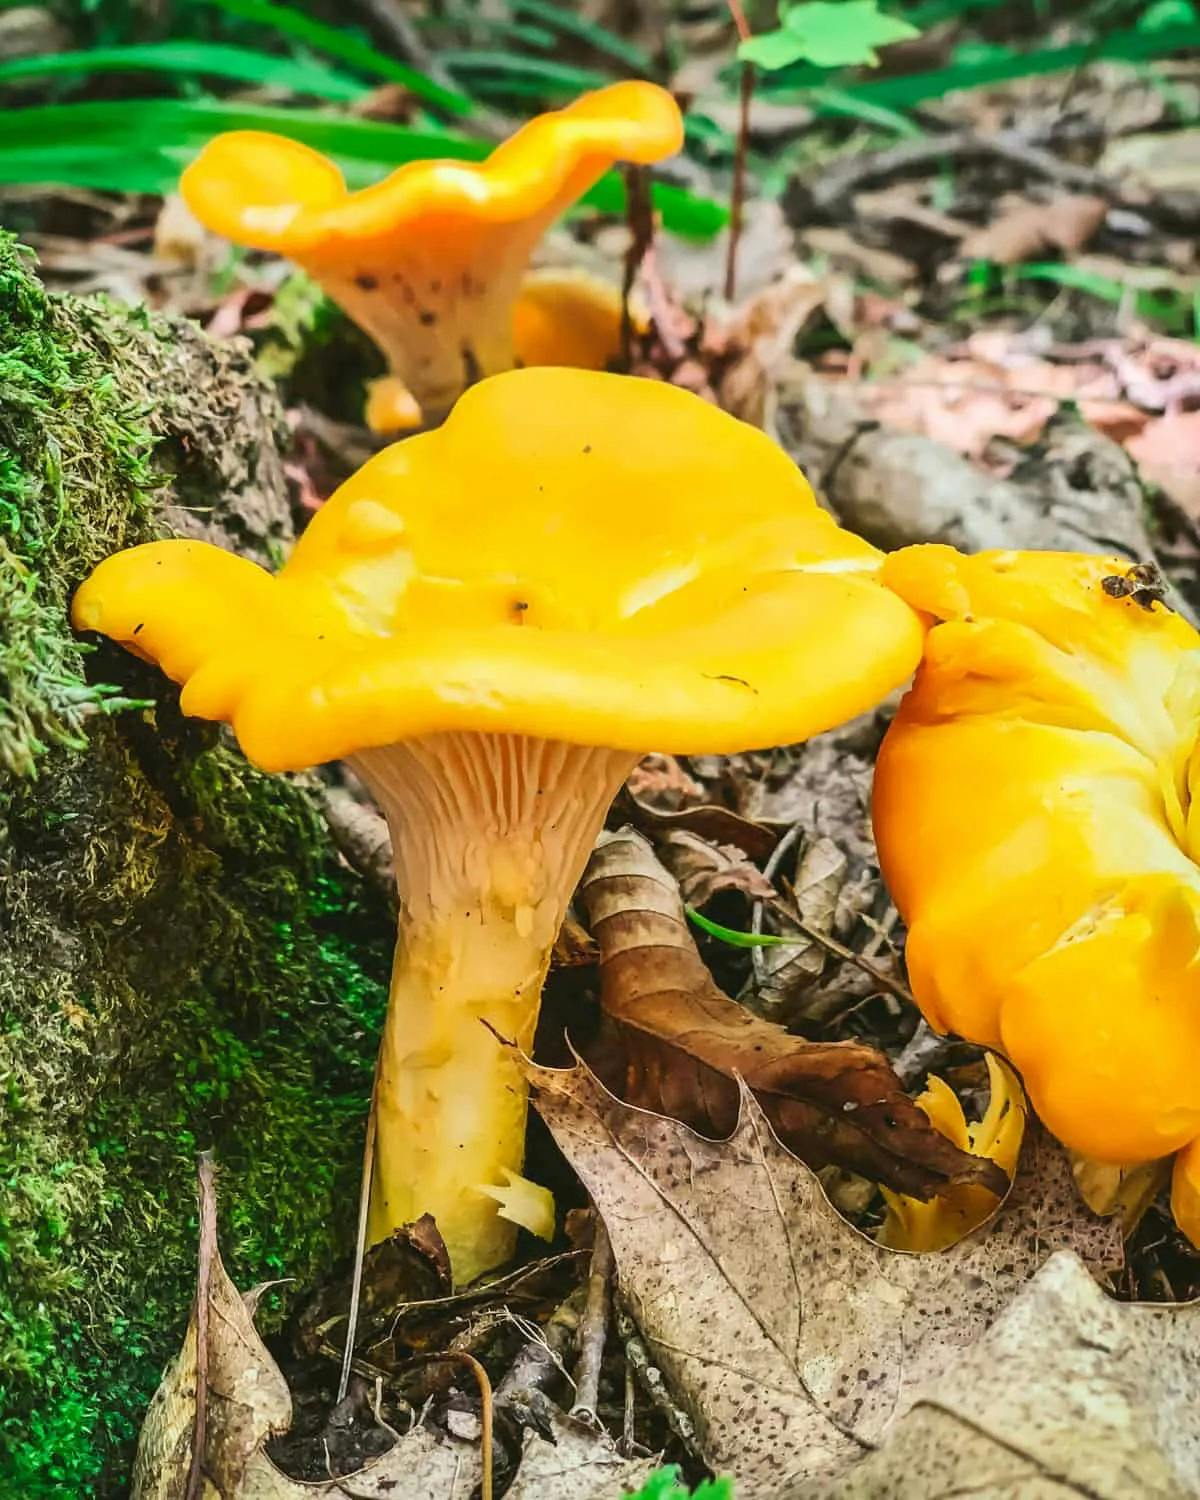 The Ultimate Guide: How to Find Golden Chanterelles in Your Local Area